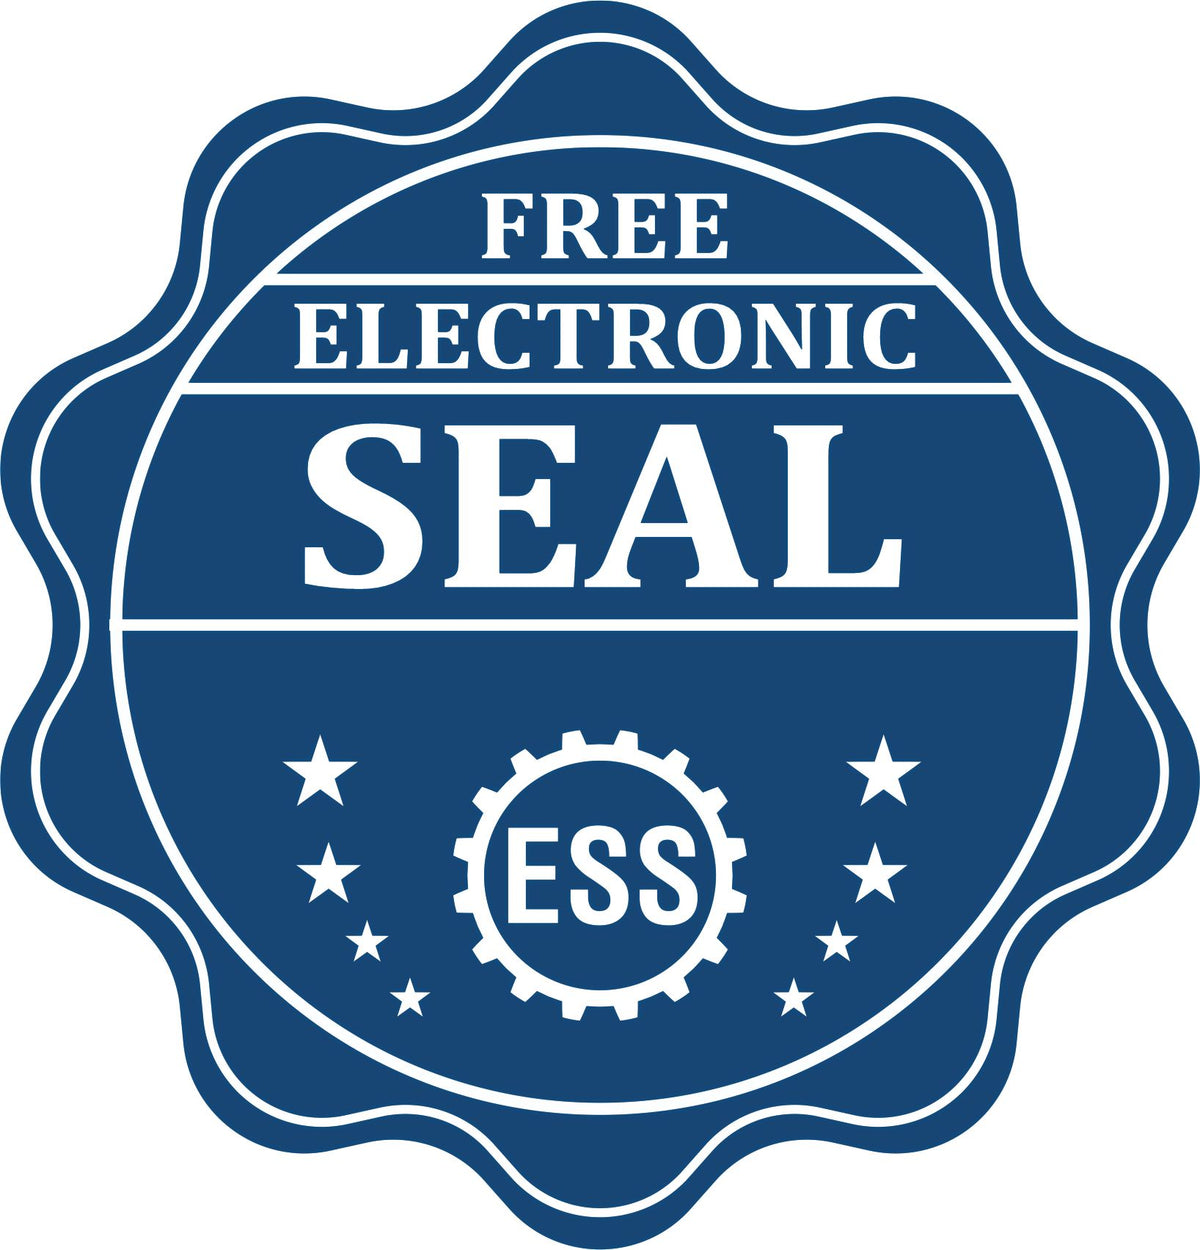 A badge showing a free electronic seal for the Slim Pre-Inked Georgia Professional Engineer Seal Stamp with stars and the ESS gear on the emblem.